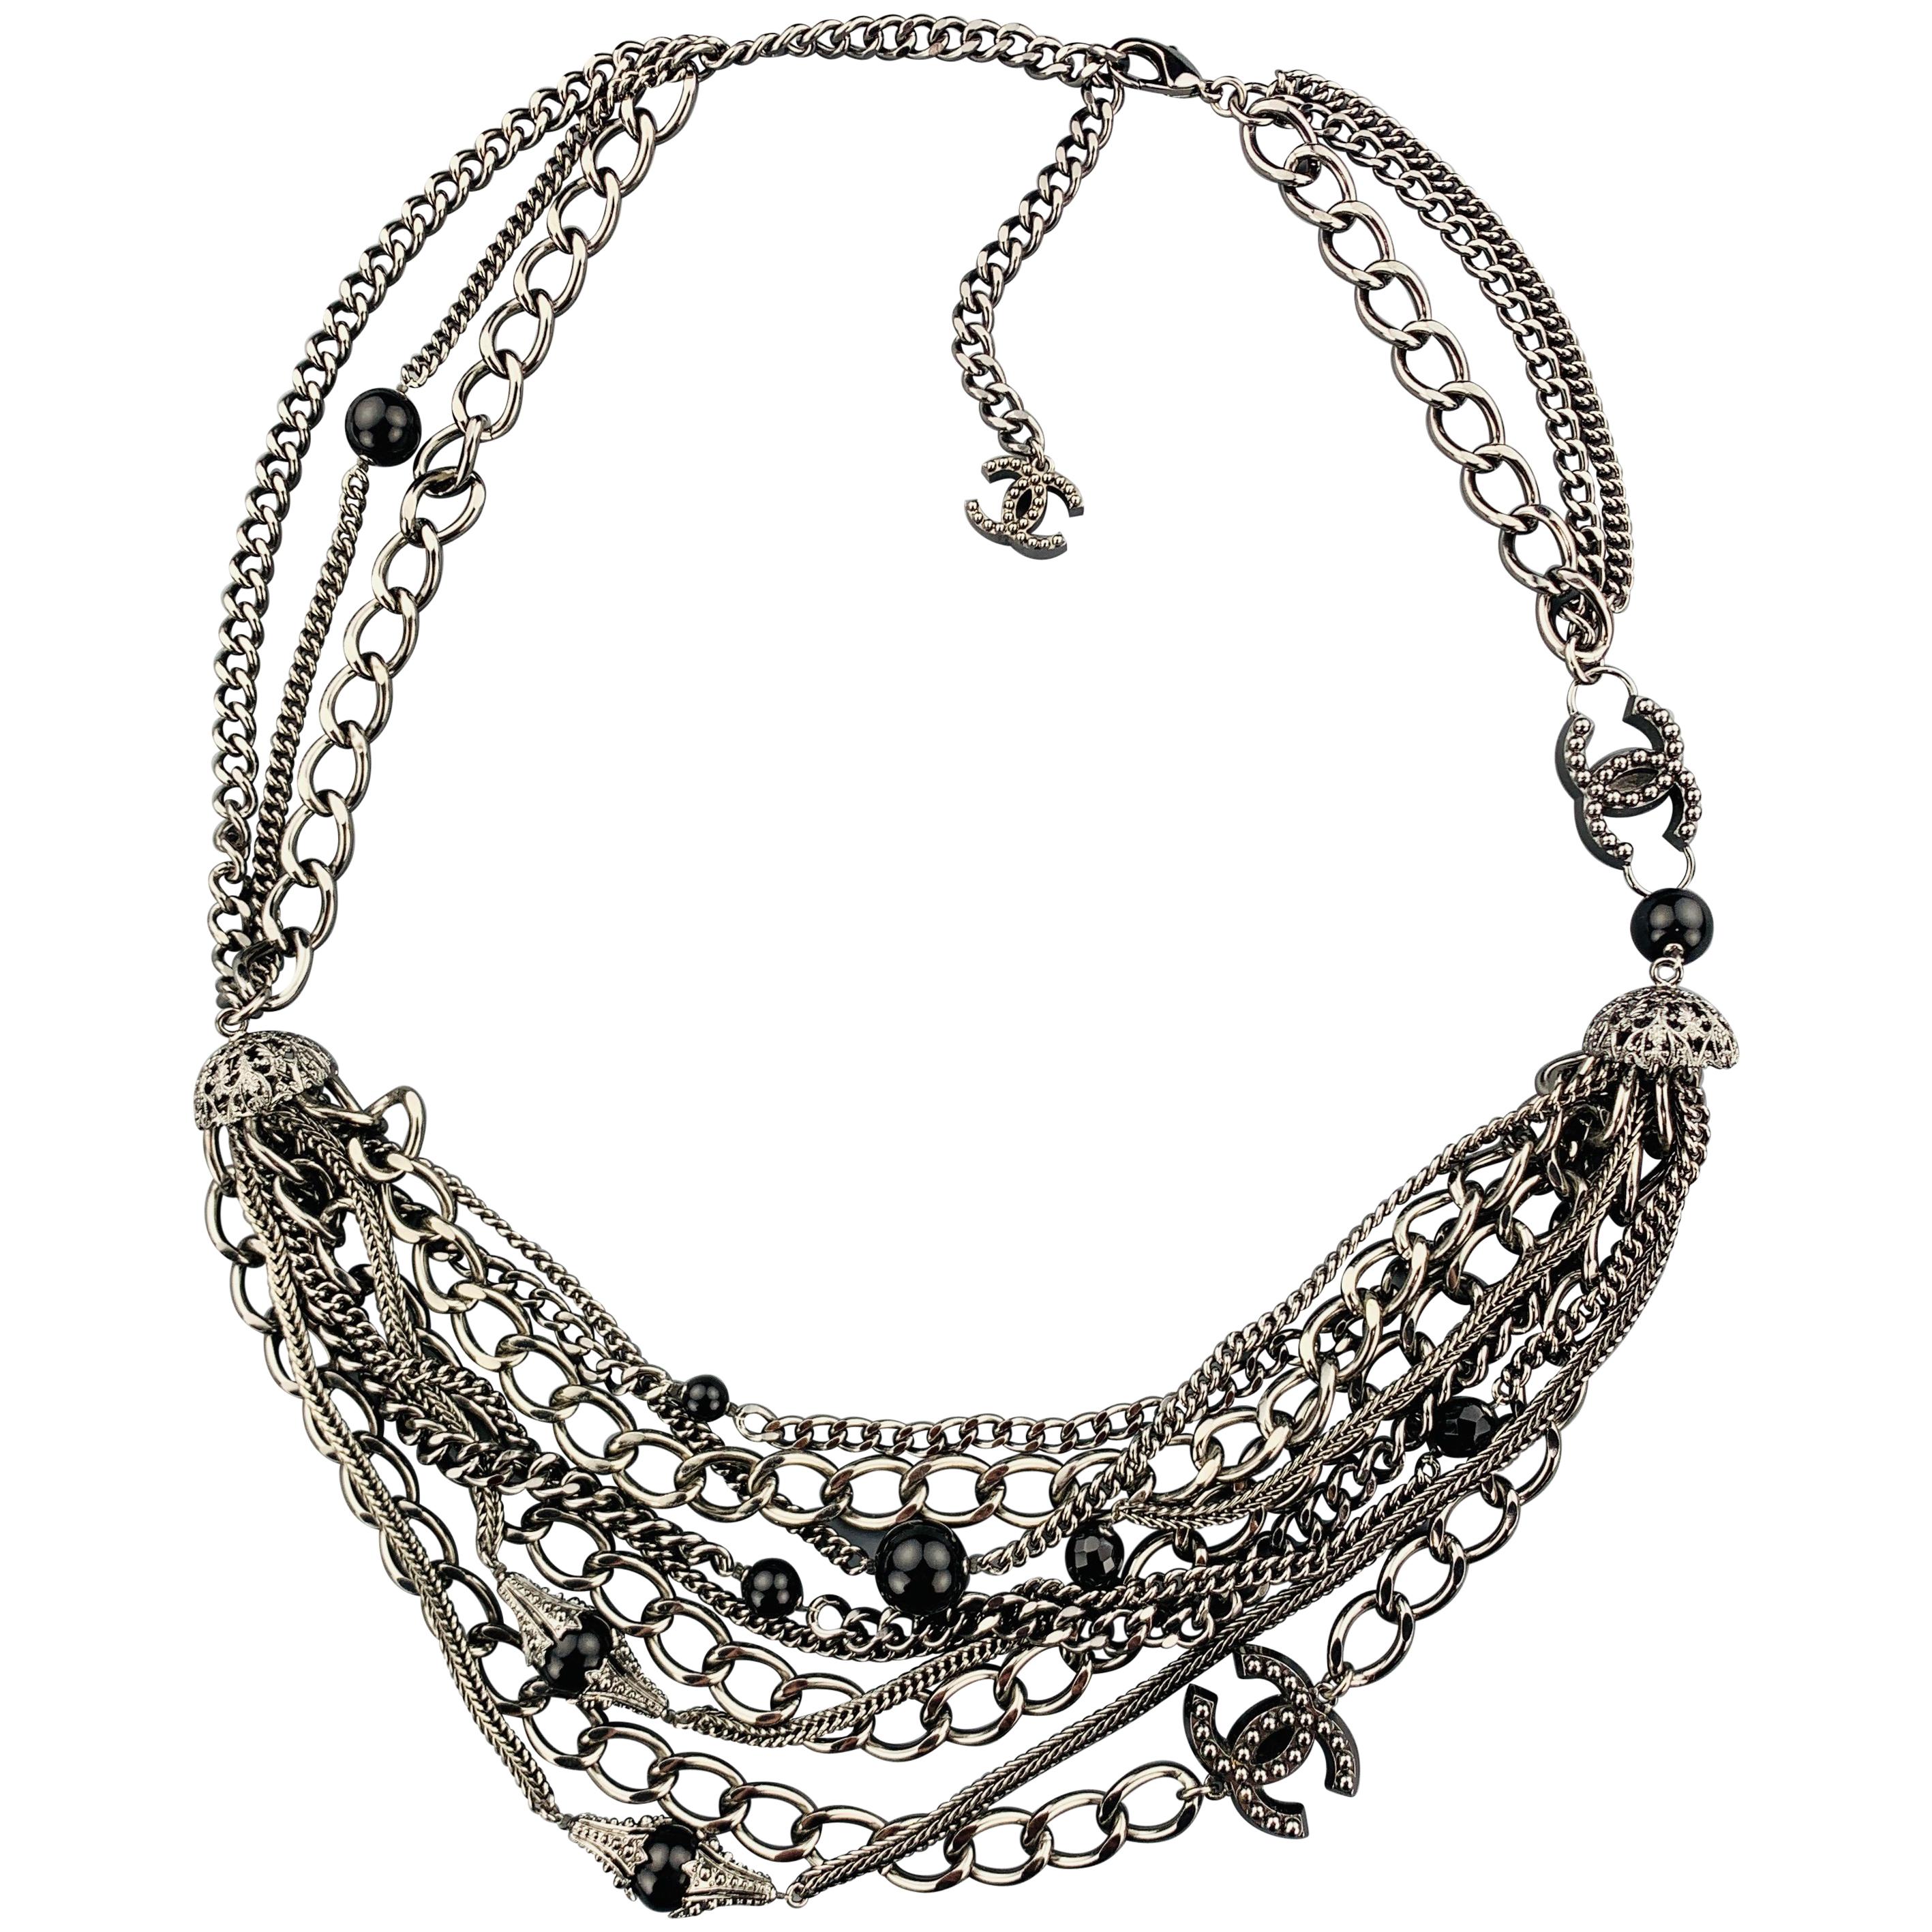 CHANEL 2003 Silver Tone Metal Multi Strand Layered Chain Statement Necklace